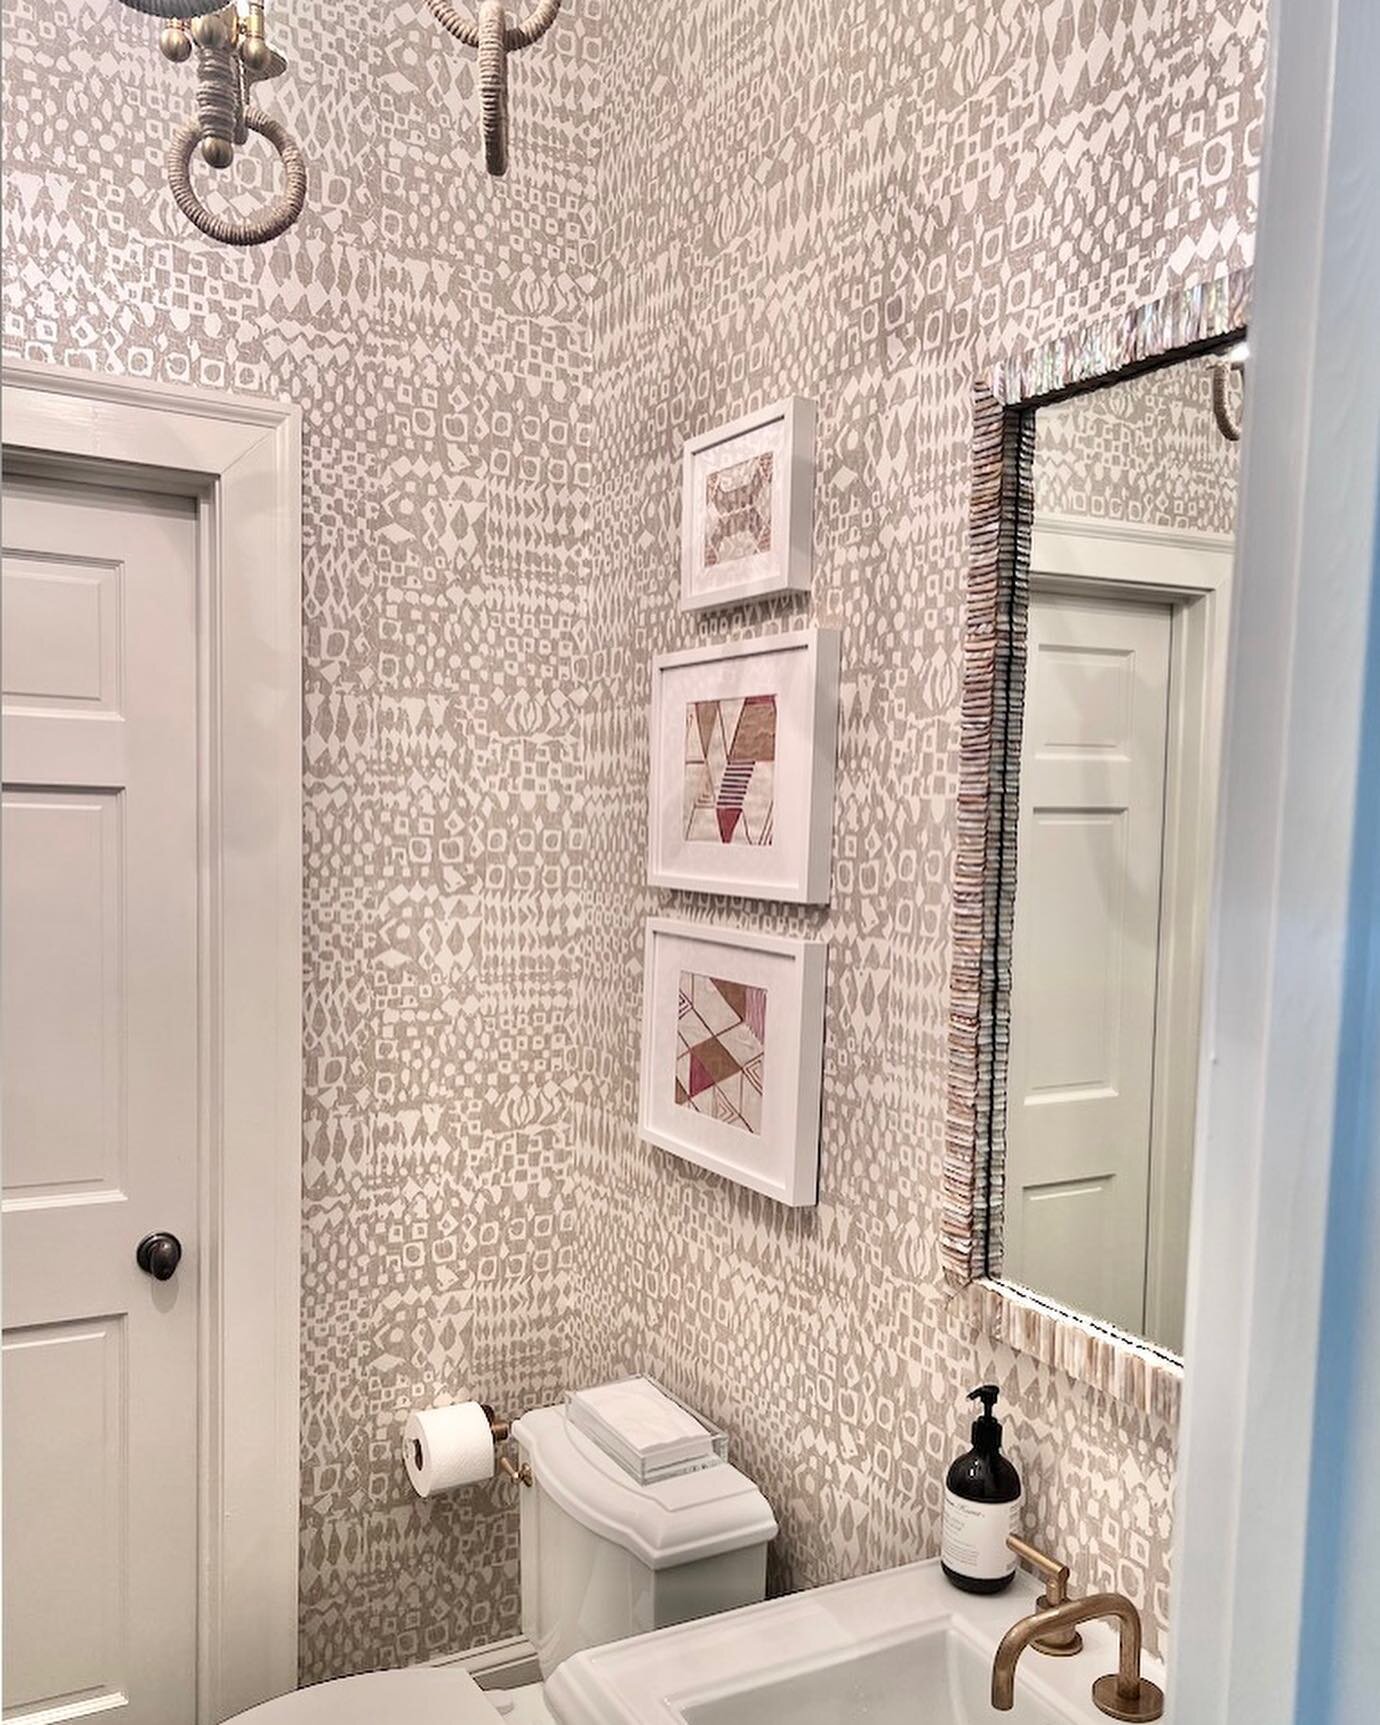 DESIGN TIP 💡

Don&rsquo;t be afraid to add that wow factor. A powder room is the perfect place to try this.
.
.
.
#interiordecor #wowfactor #bold #powderroom #interiordesign #wallpaper #interiorphilosophy #interiorphilosophyatl #atlantadesigners